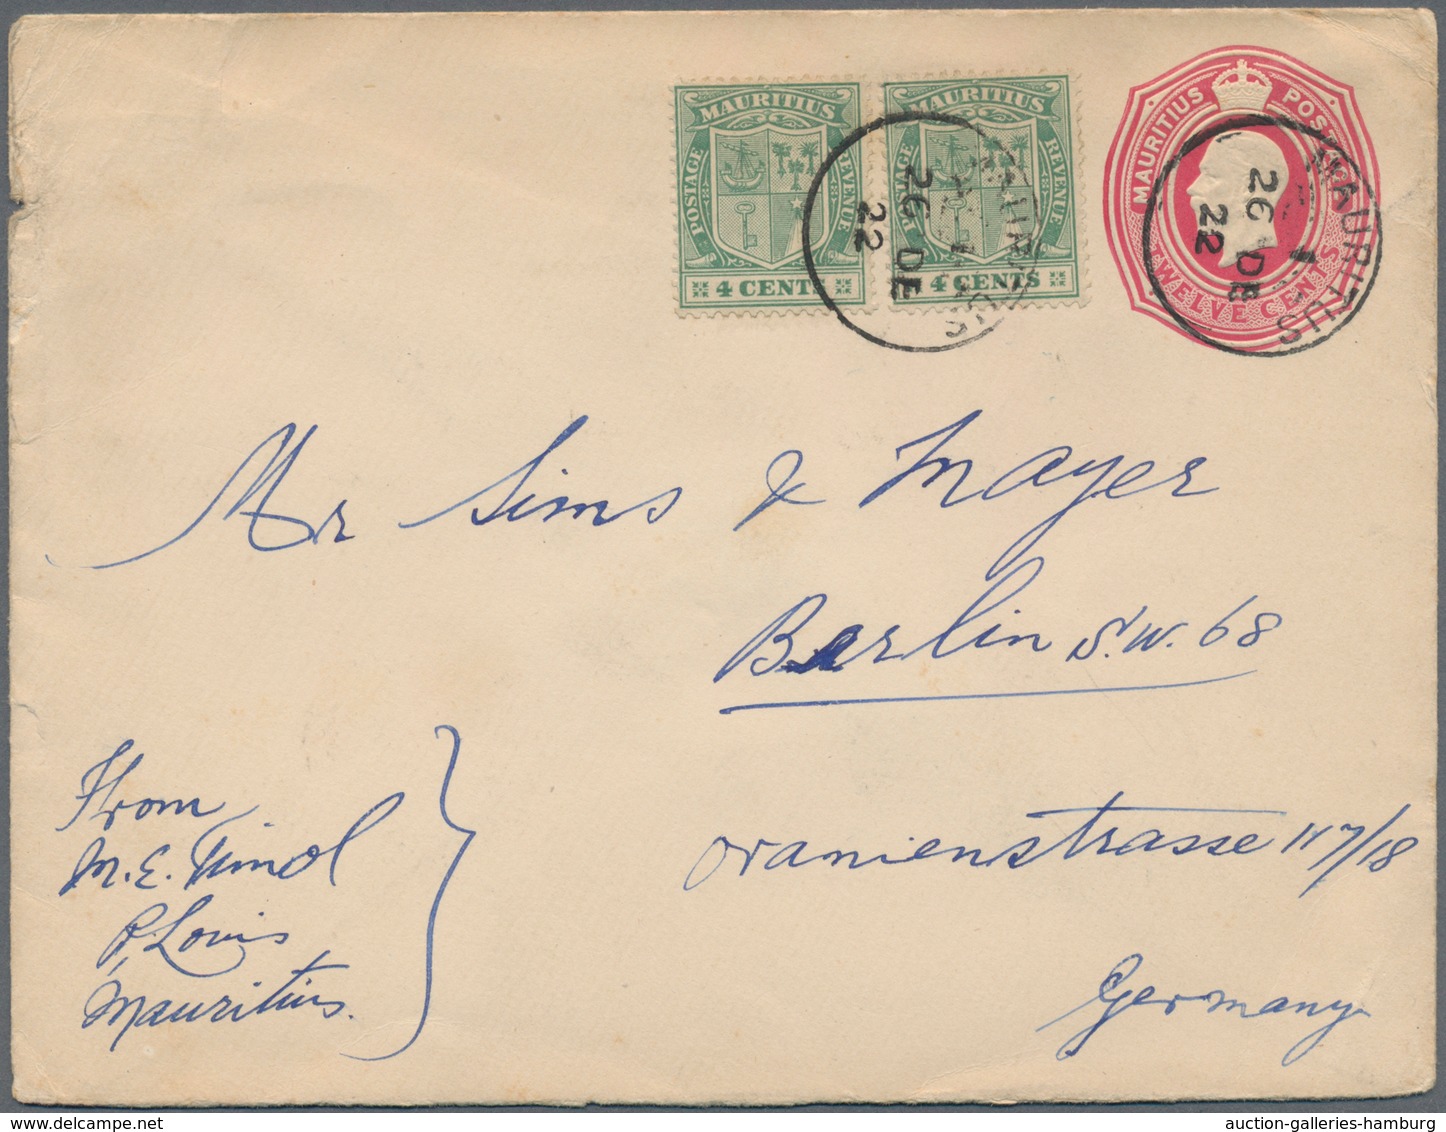 Mauritius: 1922. King George V 12c Carmine Envelope With Two 4c Added Cancelled Mauritius 26 DE 22 A - Maurice (...-1967)